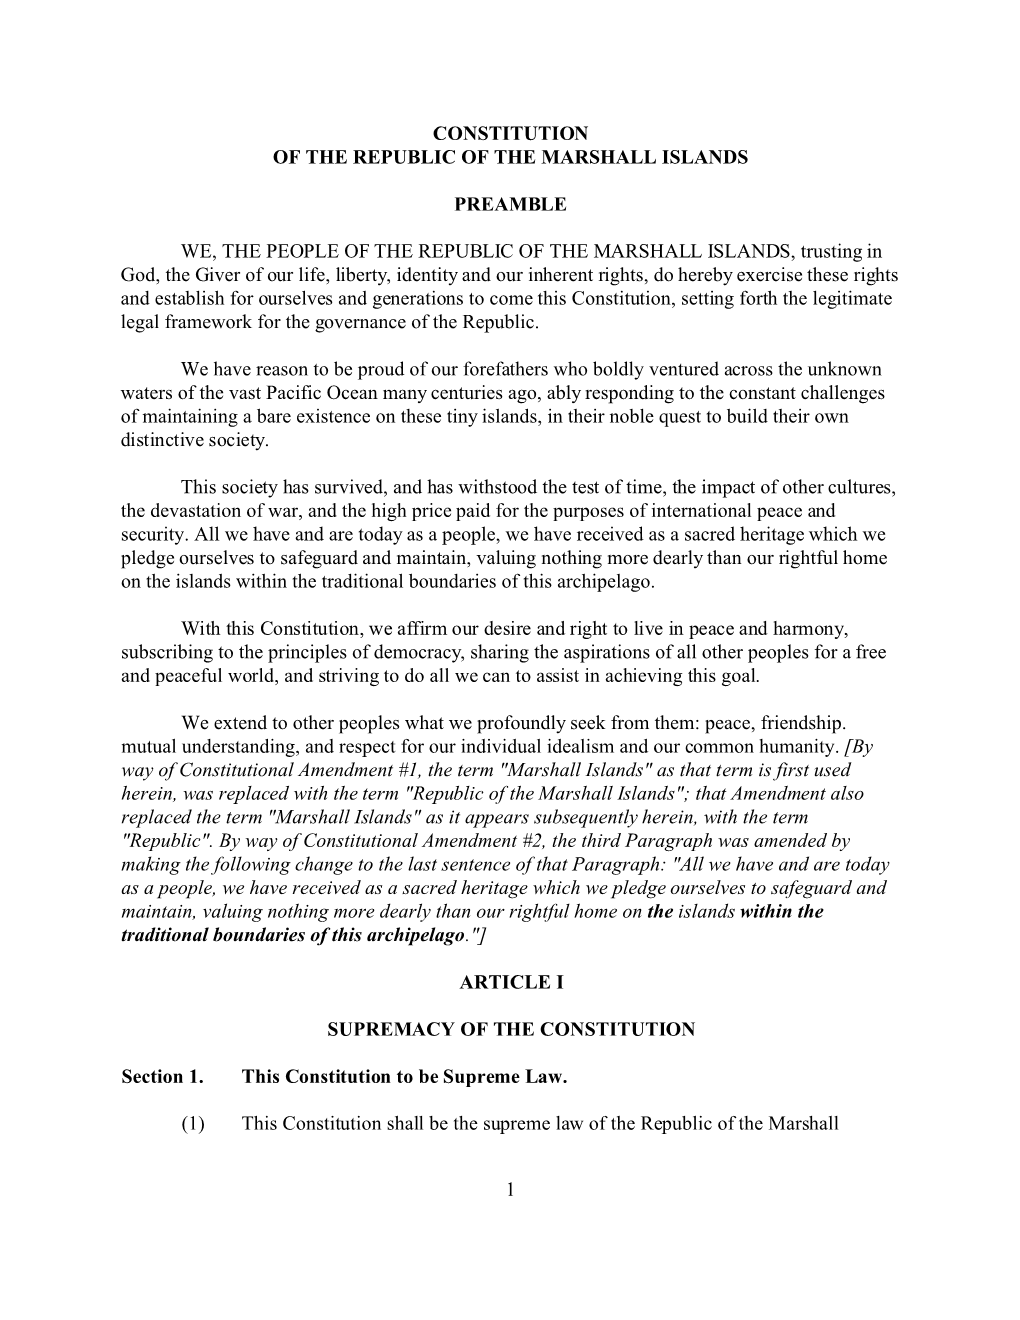 Constitution of the Republic of the Marshall Islands